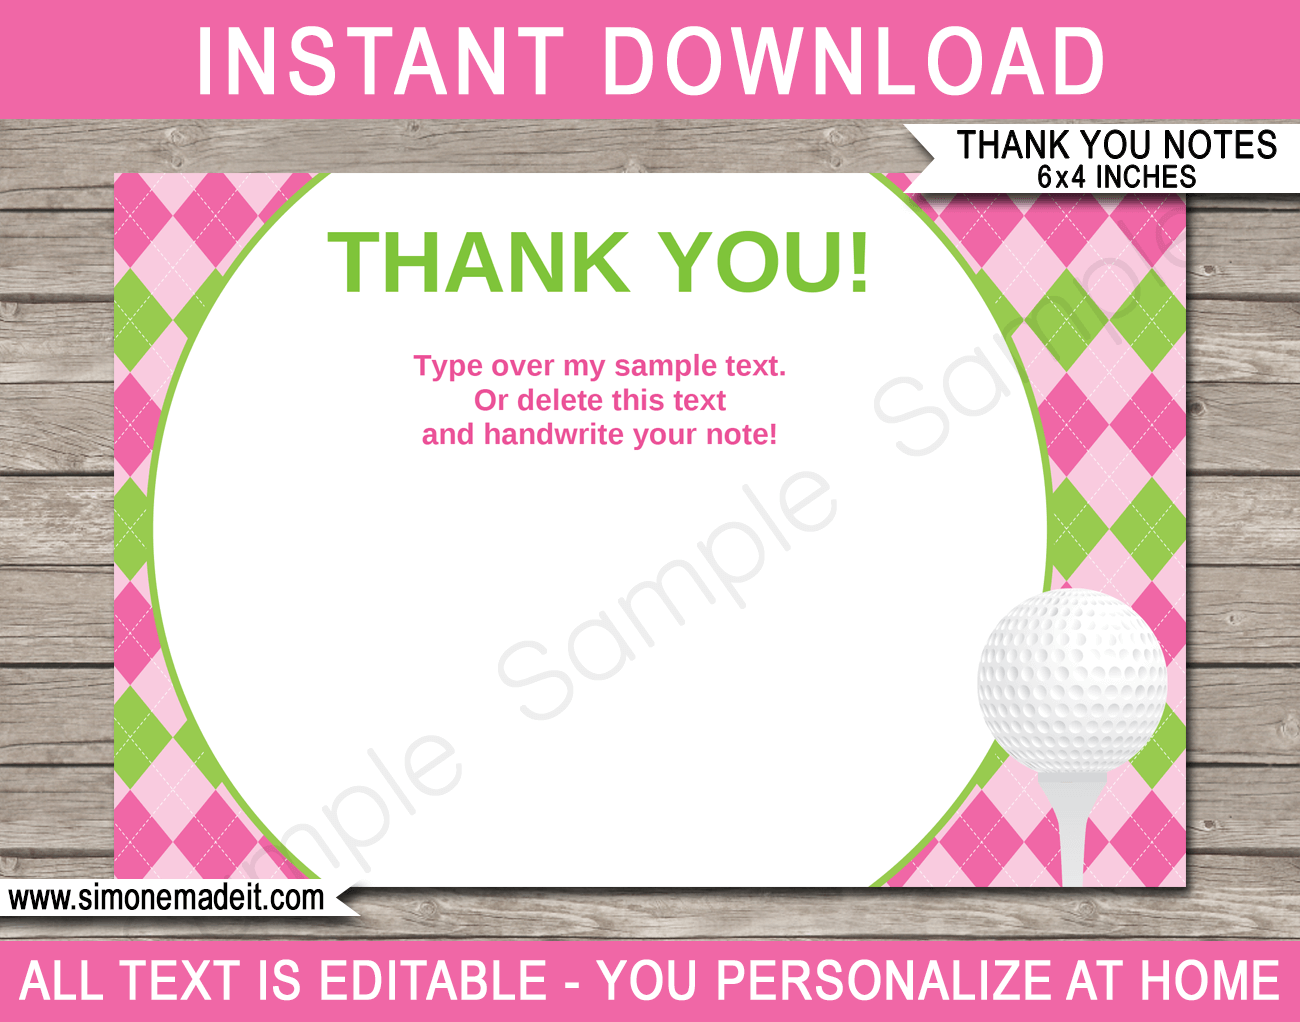 Printable Golf Birthday Party Thank You Note Cards - Favor Tags - Golf theme - Editable Template - Instant Download via simonemadeit.com